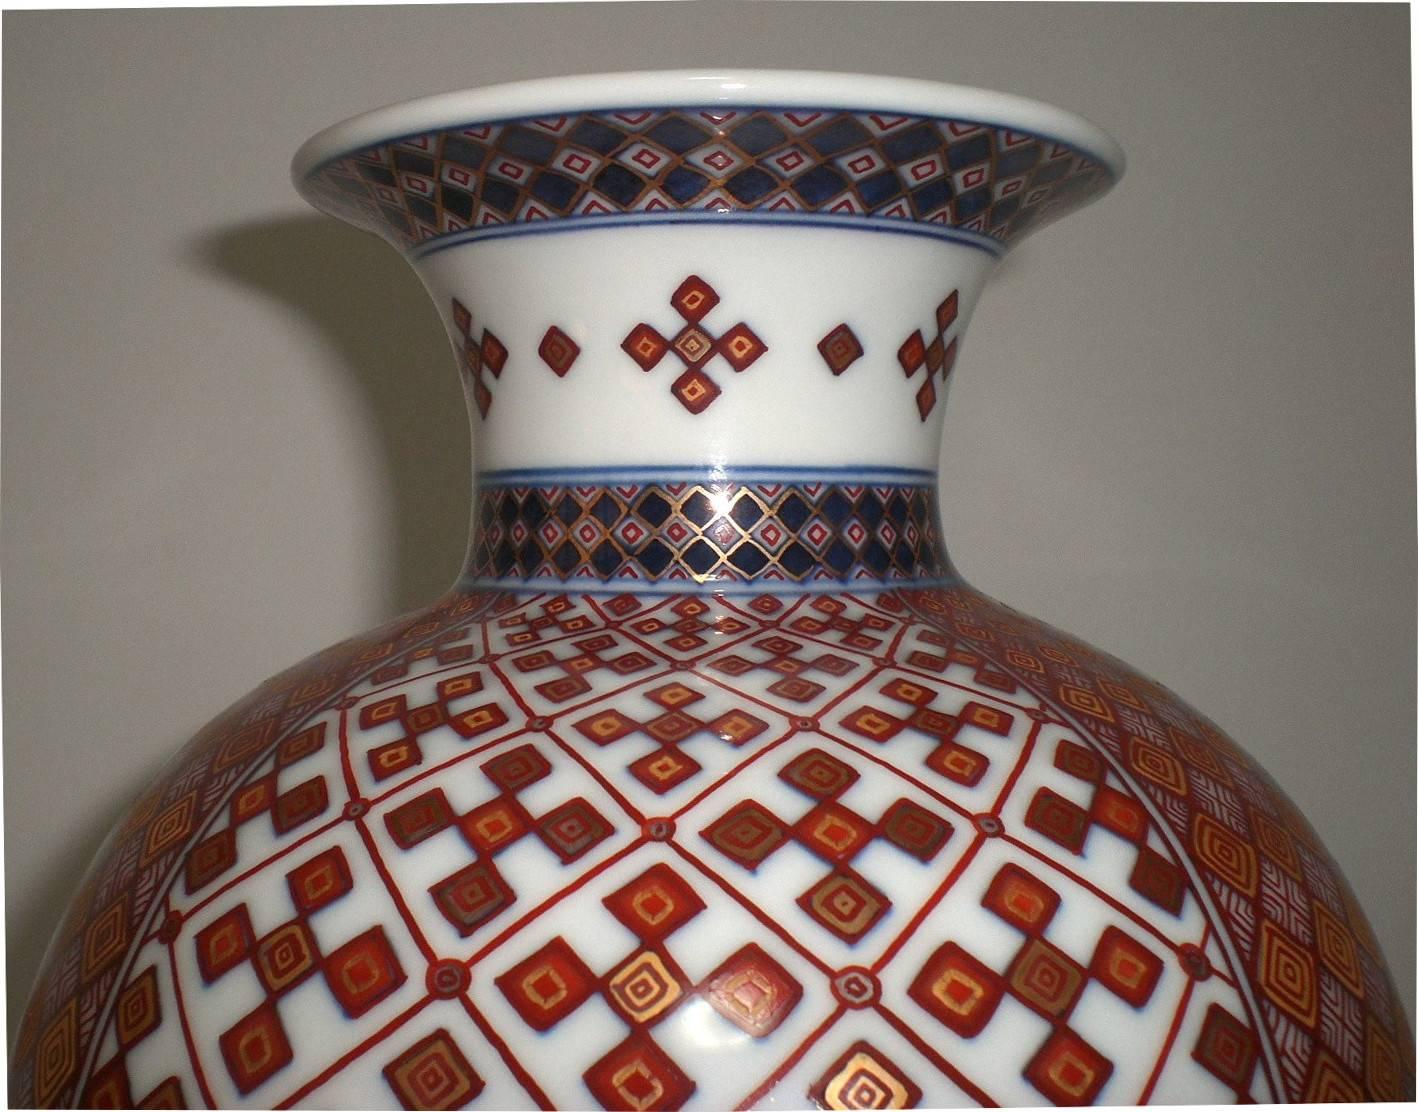 Exquisite Jpanese contemporary signed decorative porcelain vase with its extraordinary shape, extremely intricately hand-painted featuring two fascinating and incredibly detailed geometric progression in stunning deep blue, iron-red and gold on fine